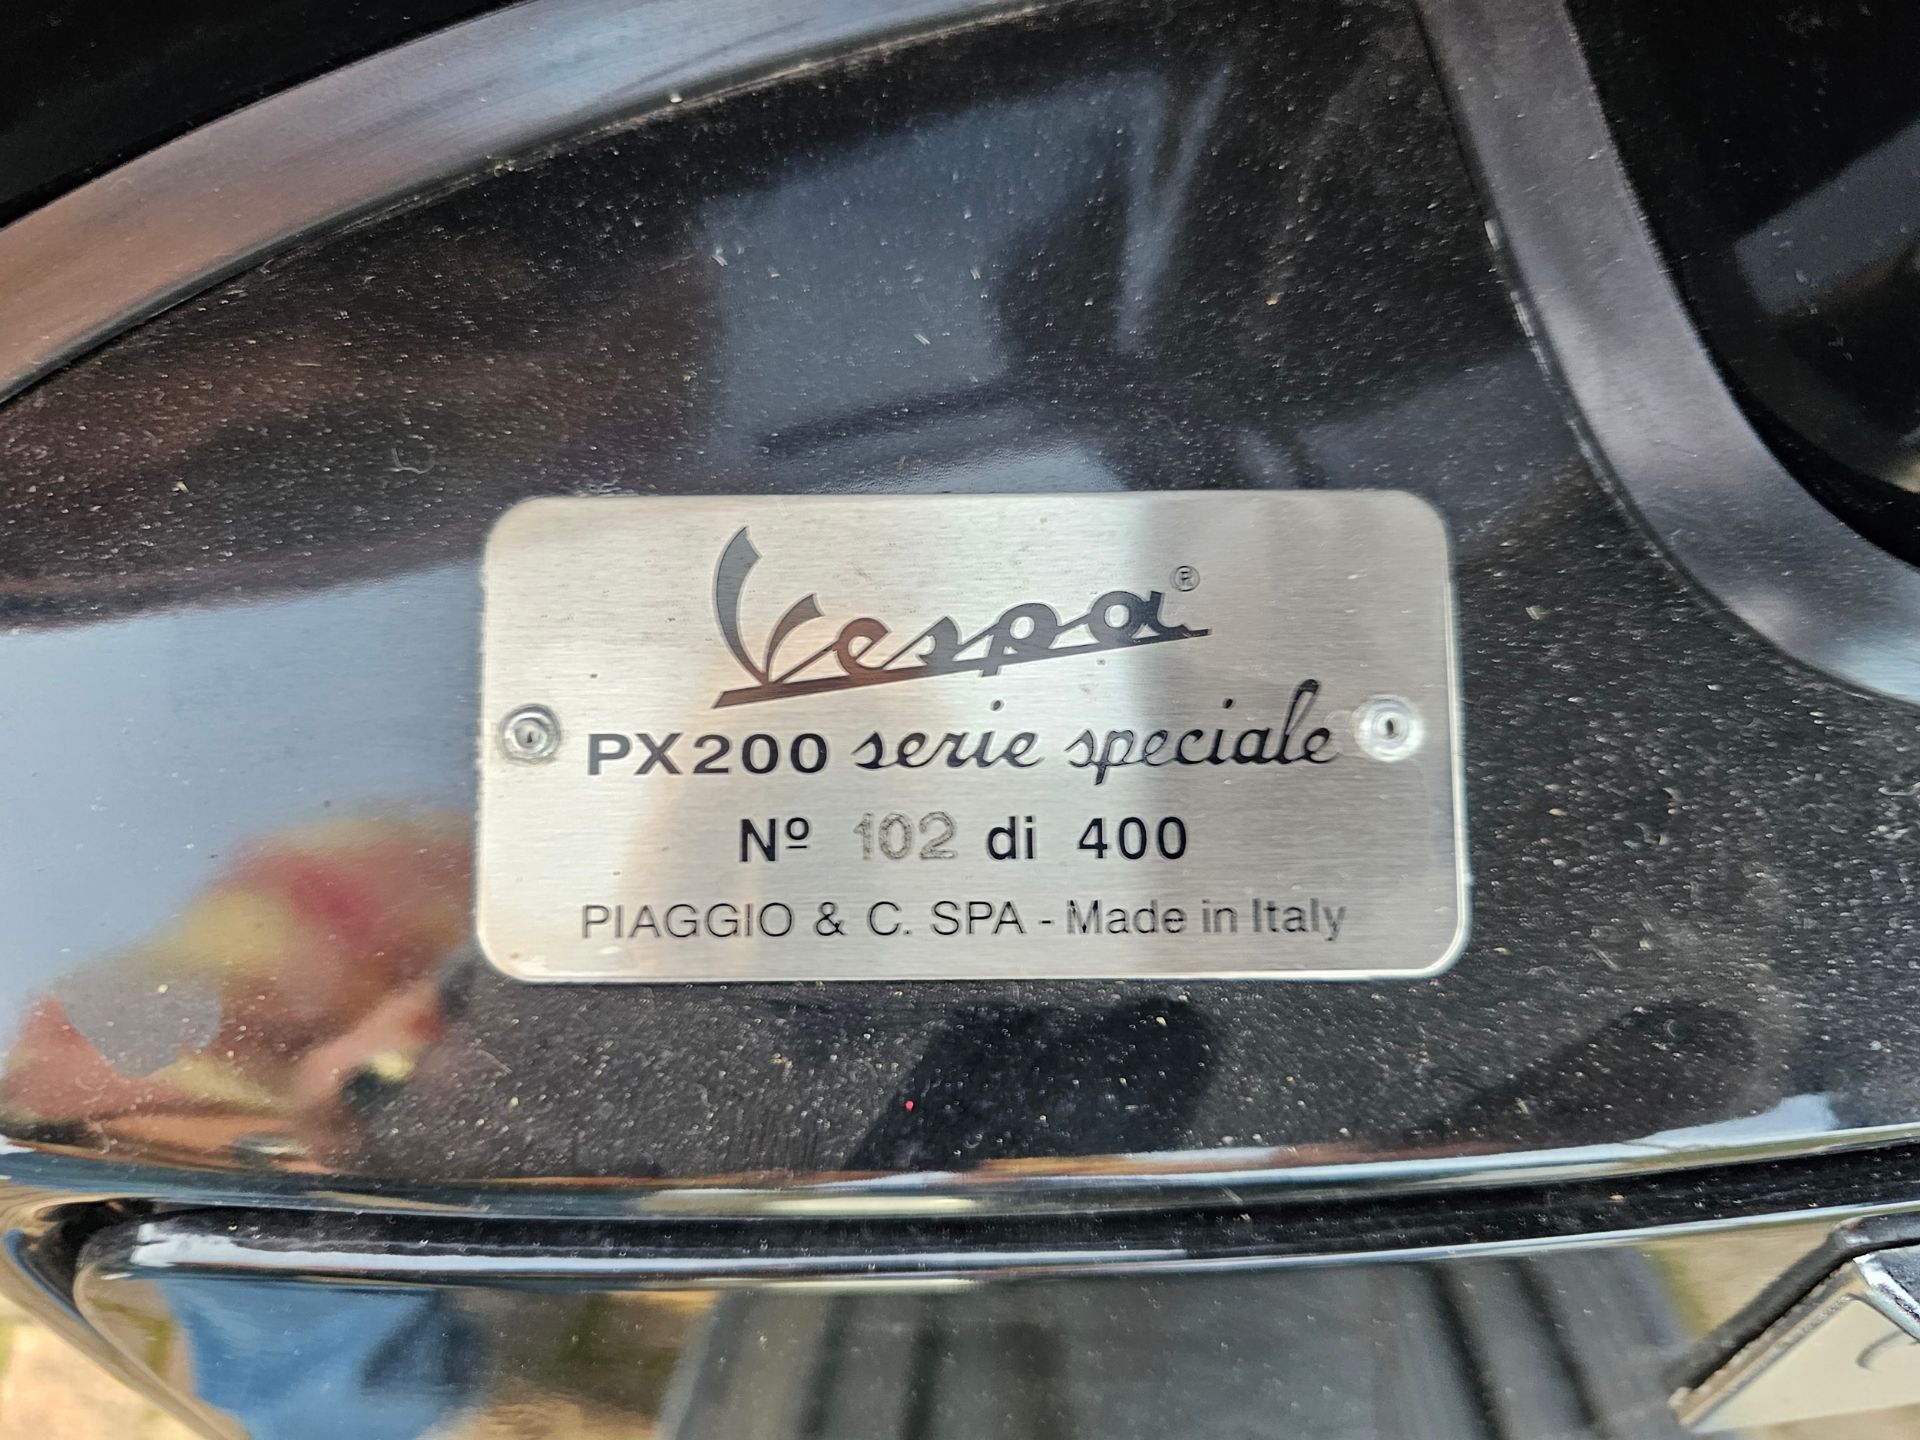 2003 Piaggio Vespa PX200 Serie Speciale Limited Edition 102/400, 198cc. Registration number P200 - Image 7 of 9